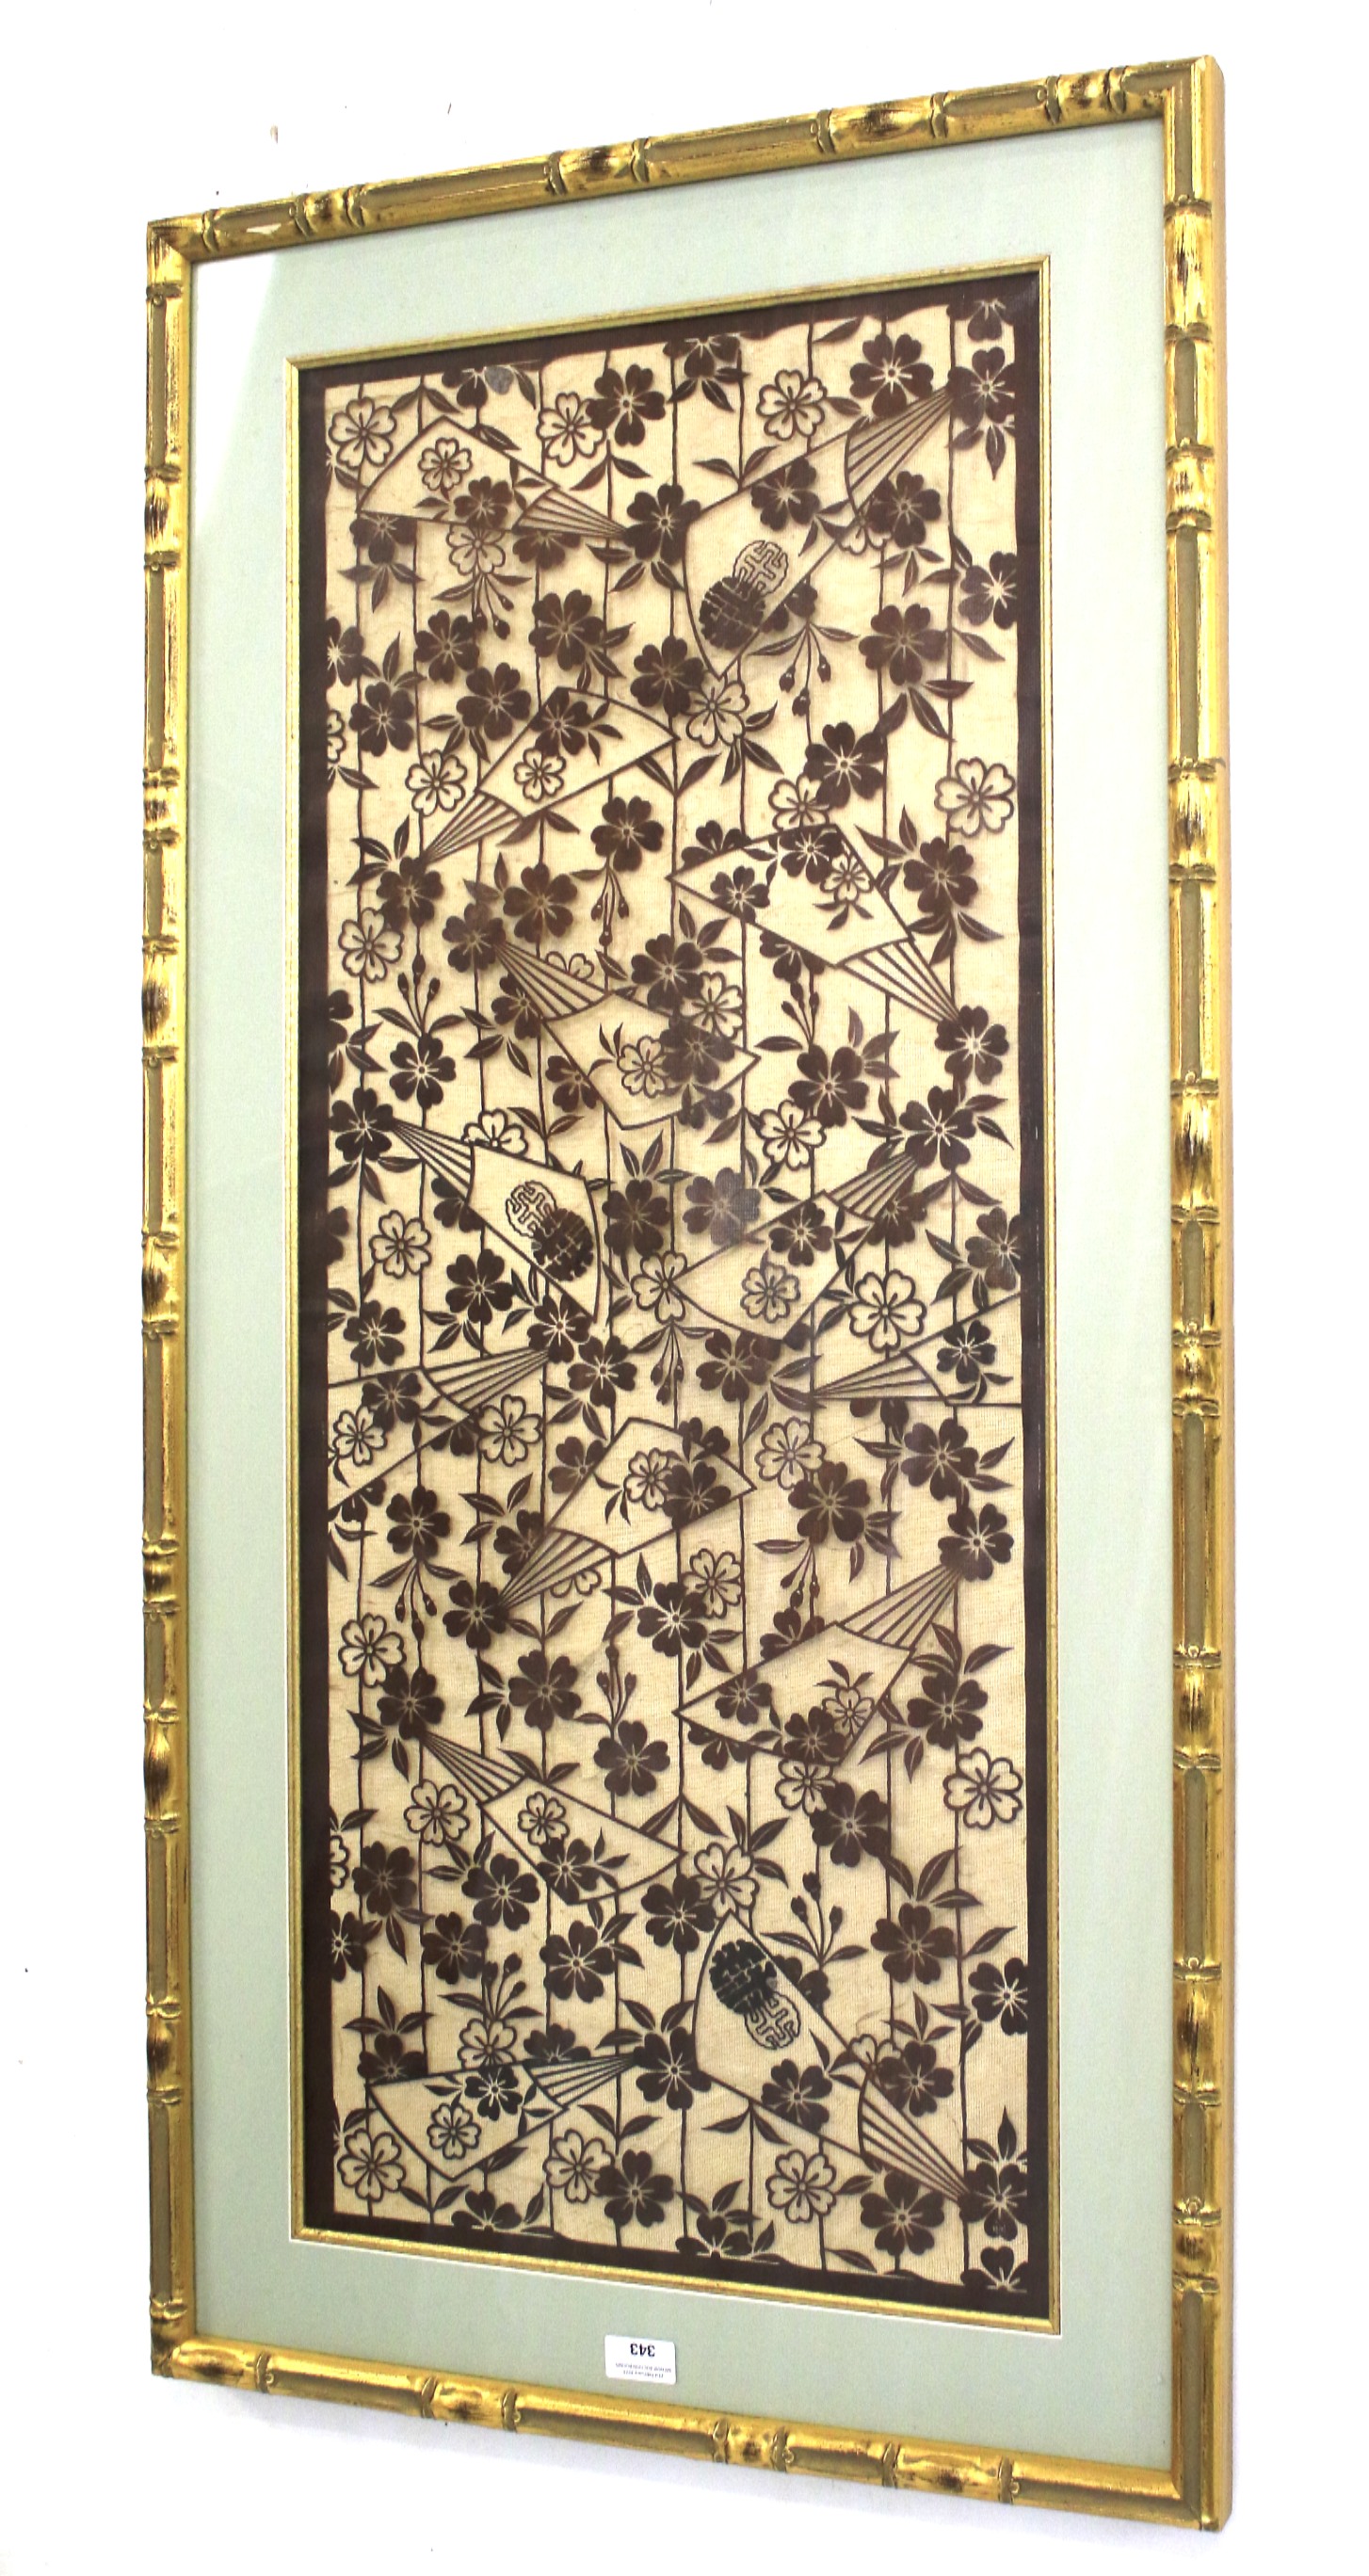 A 20th century Chinese/Japanese school segment of textile on gauze with floral and fan design.